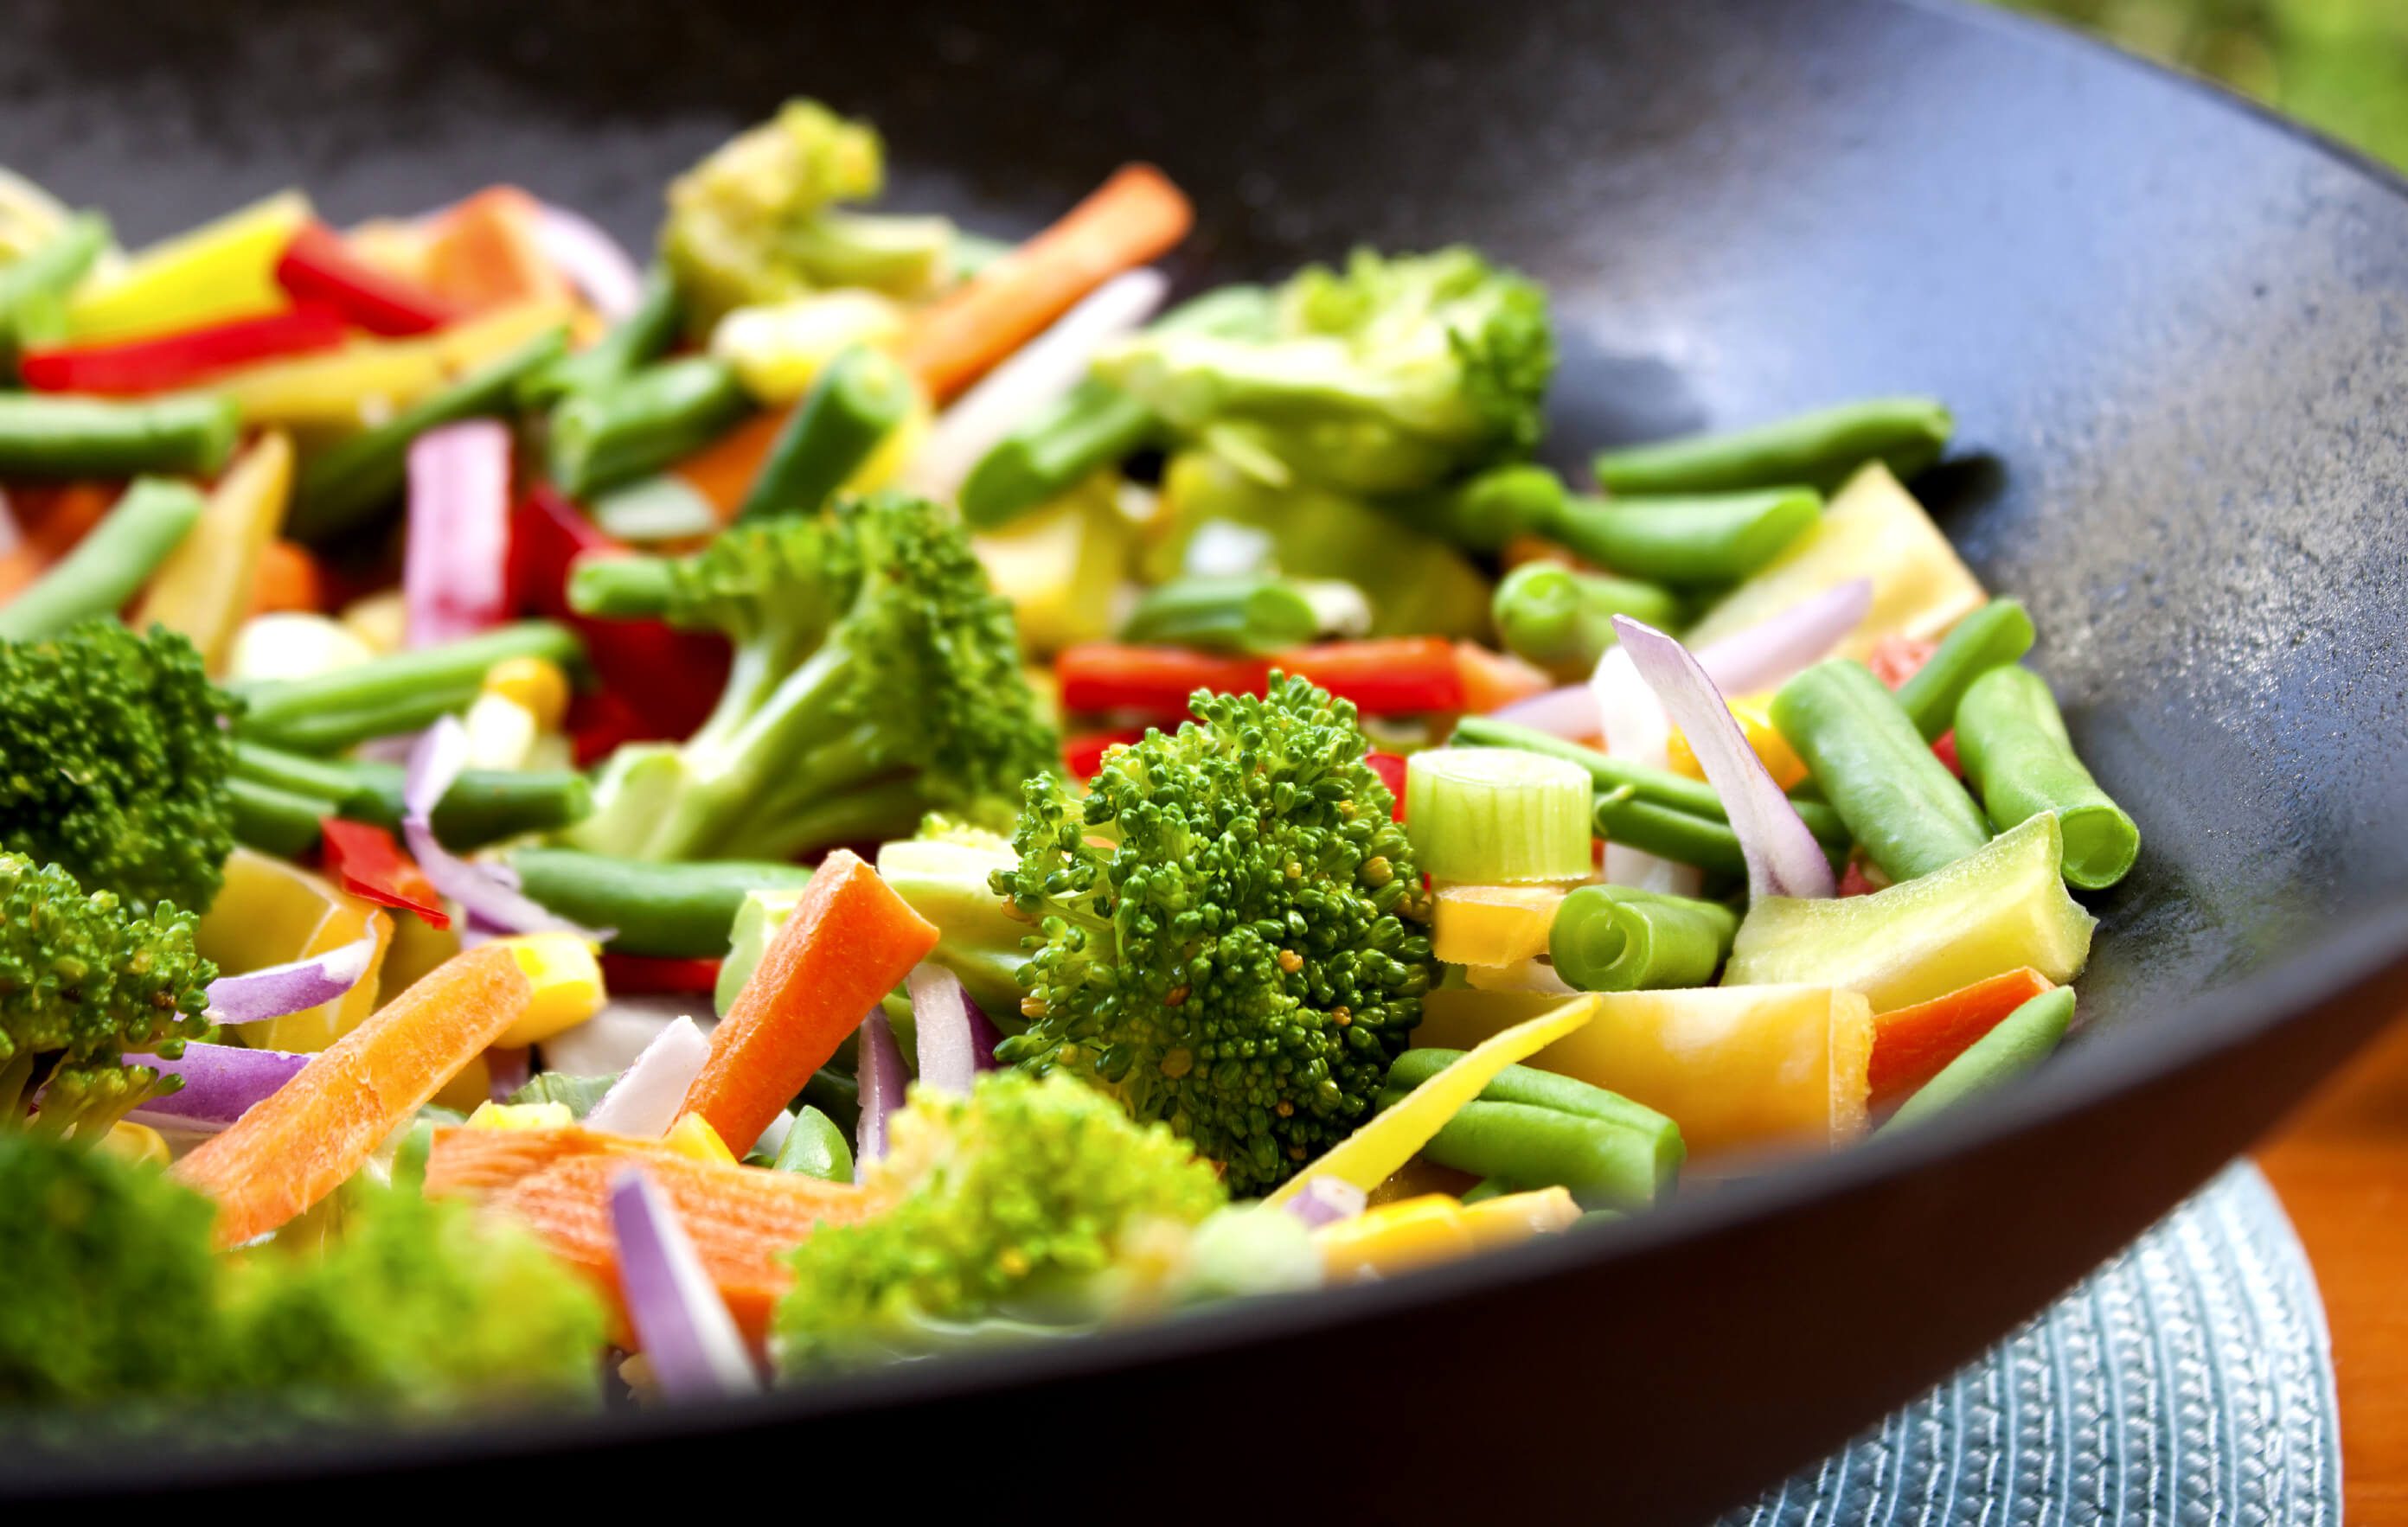 Vegetables cooked without oil for the Forks Over Knives plant-based diet